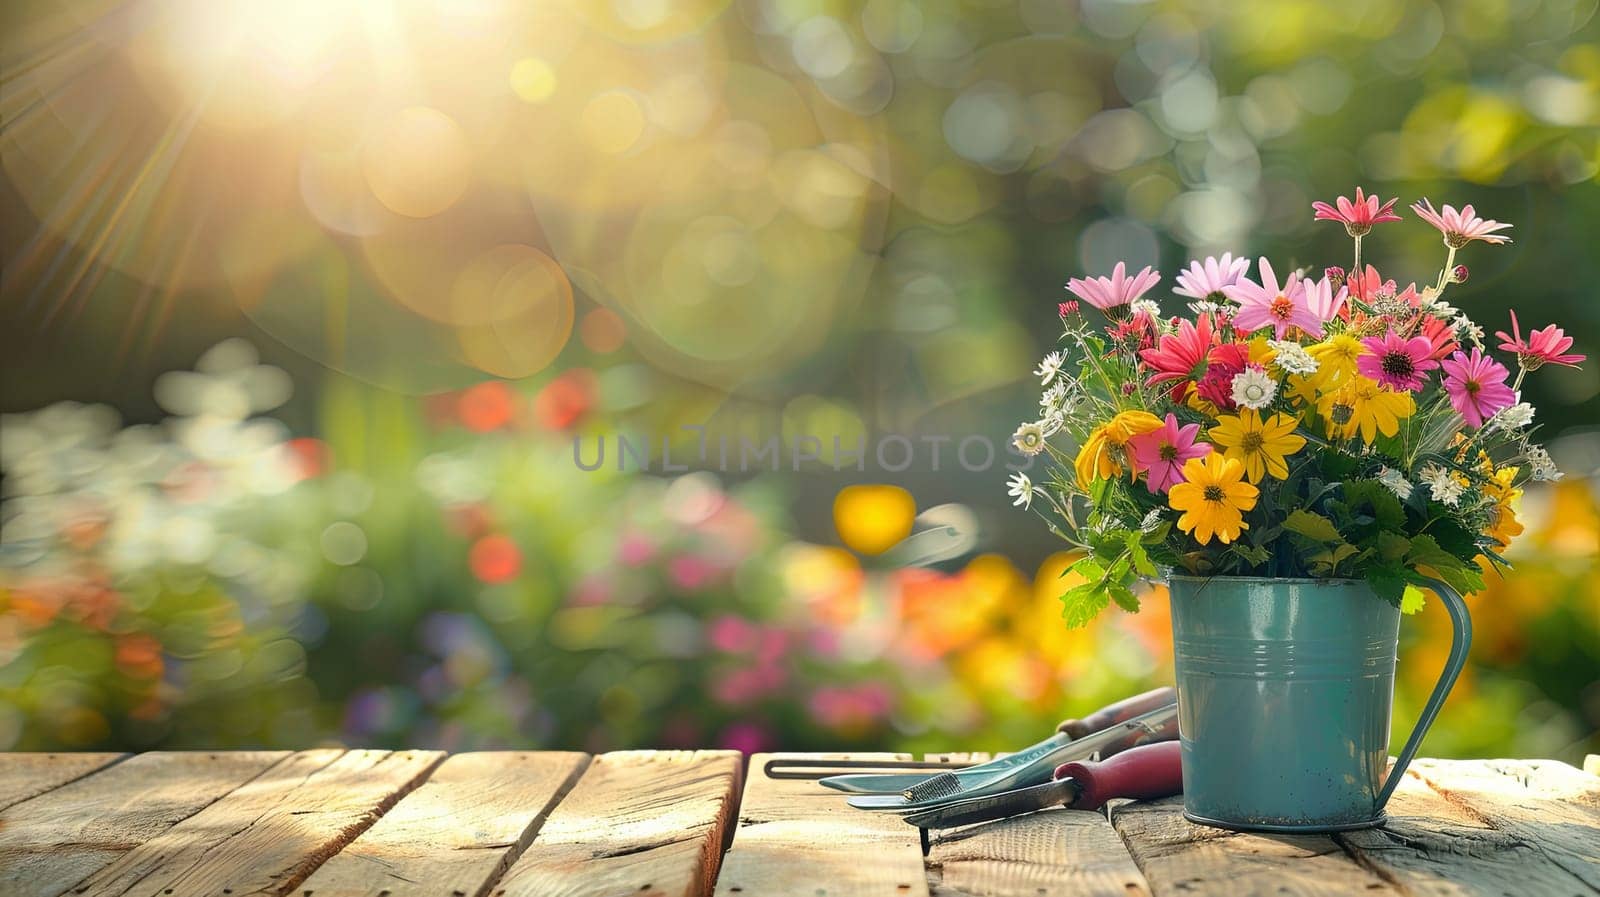 Colorful flowers arranged in a watering can on a wooden table with garden tools around, set against a blurred natural background.